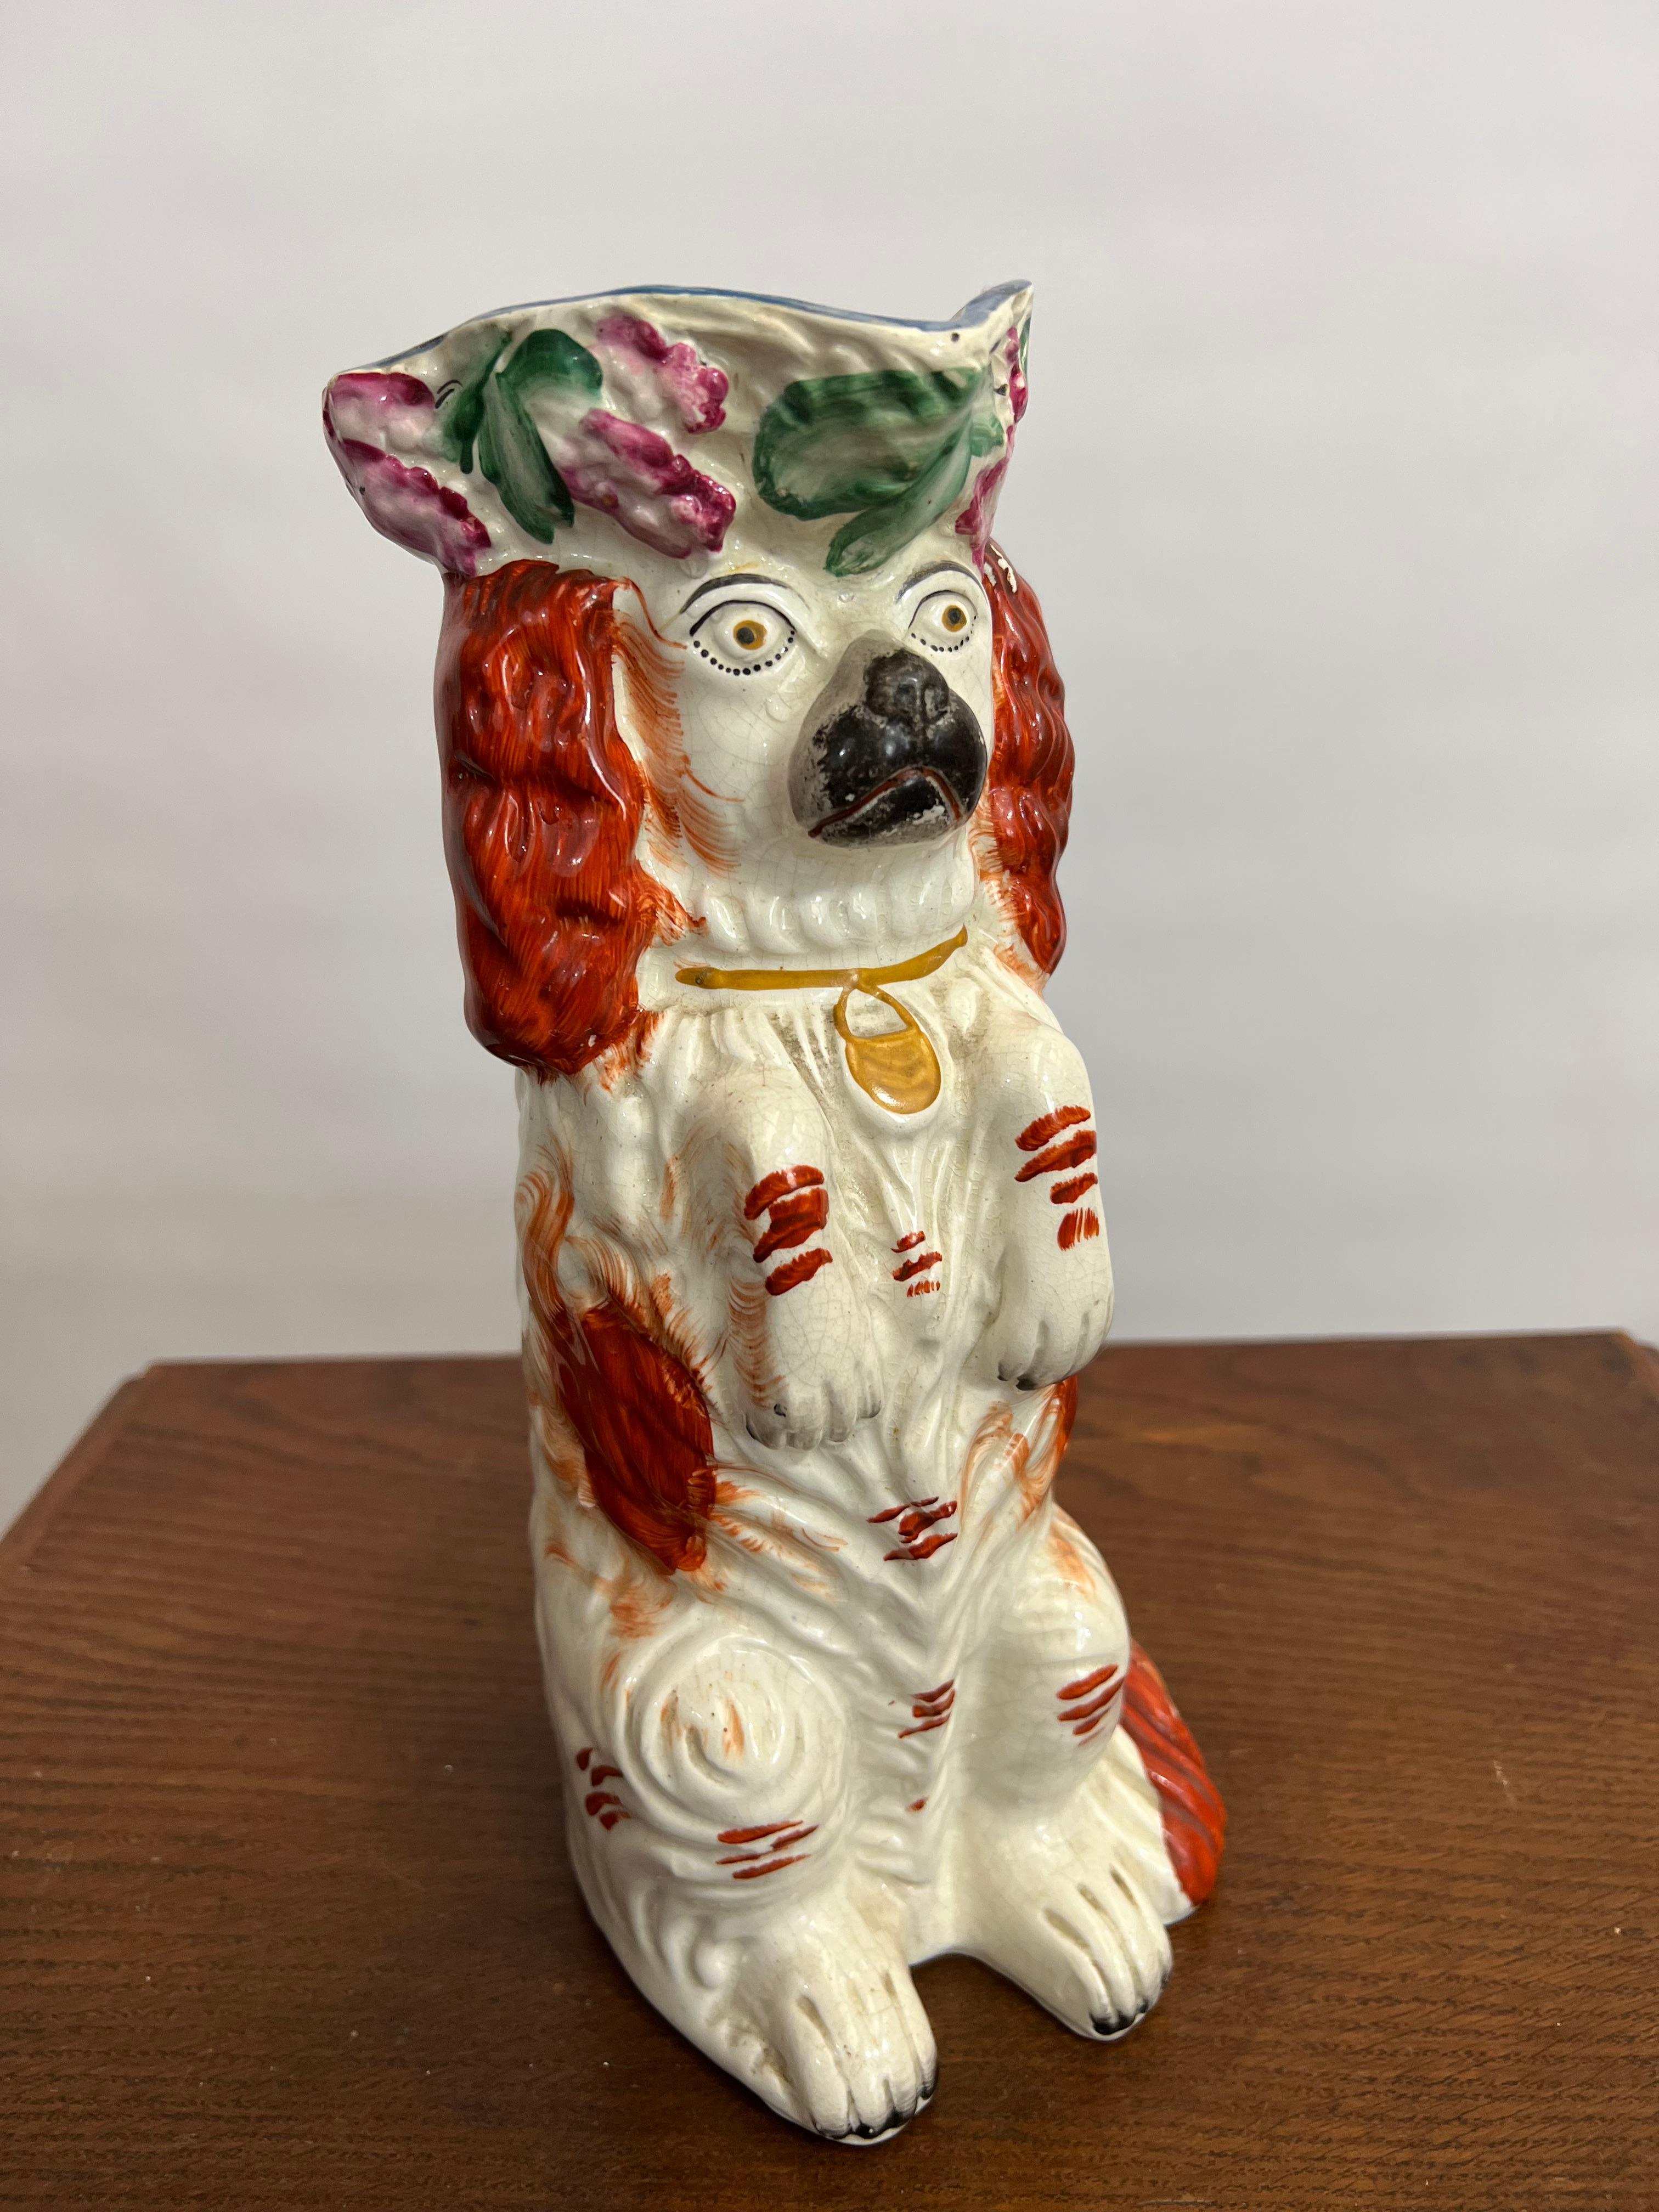 Antique Staffordshire Pottery Spaniel Water Jug circa 1850
English Staffordshire Begging Spaniel Dog Jug Red & White
ref 3075
very well modelled and richly decorated capturing the Spaniel
in alert posture , and presented in very good condition

high